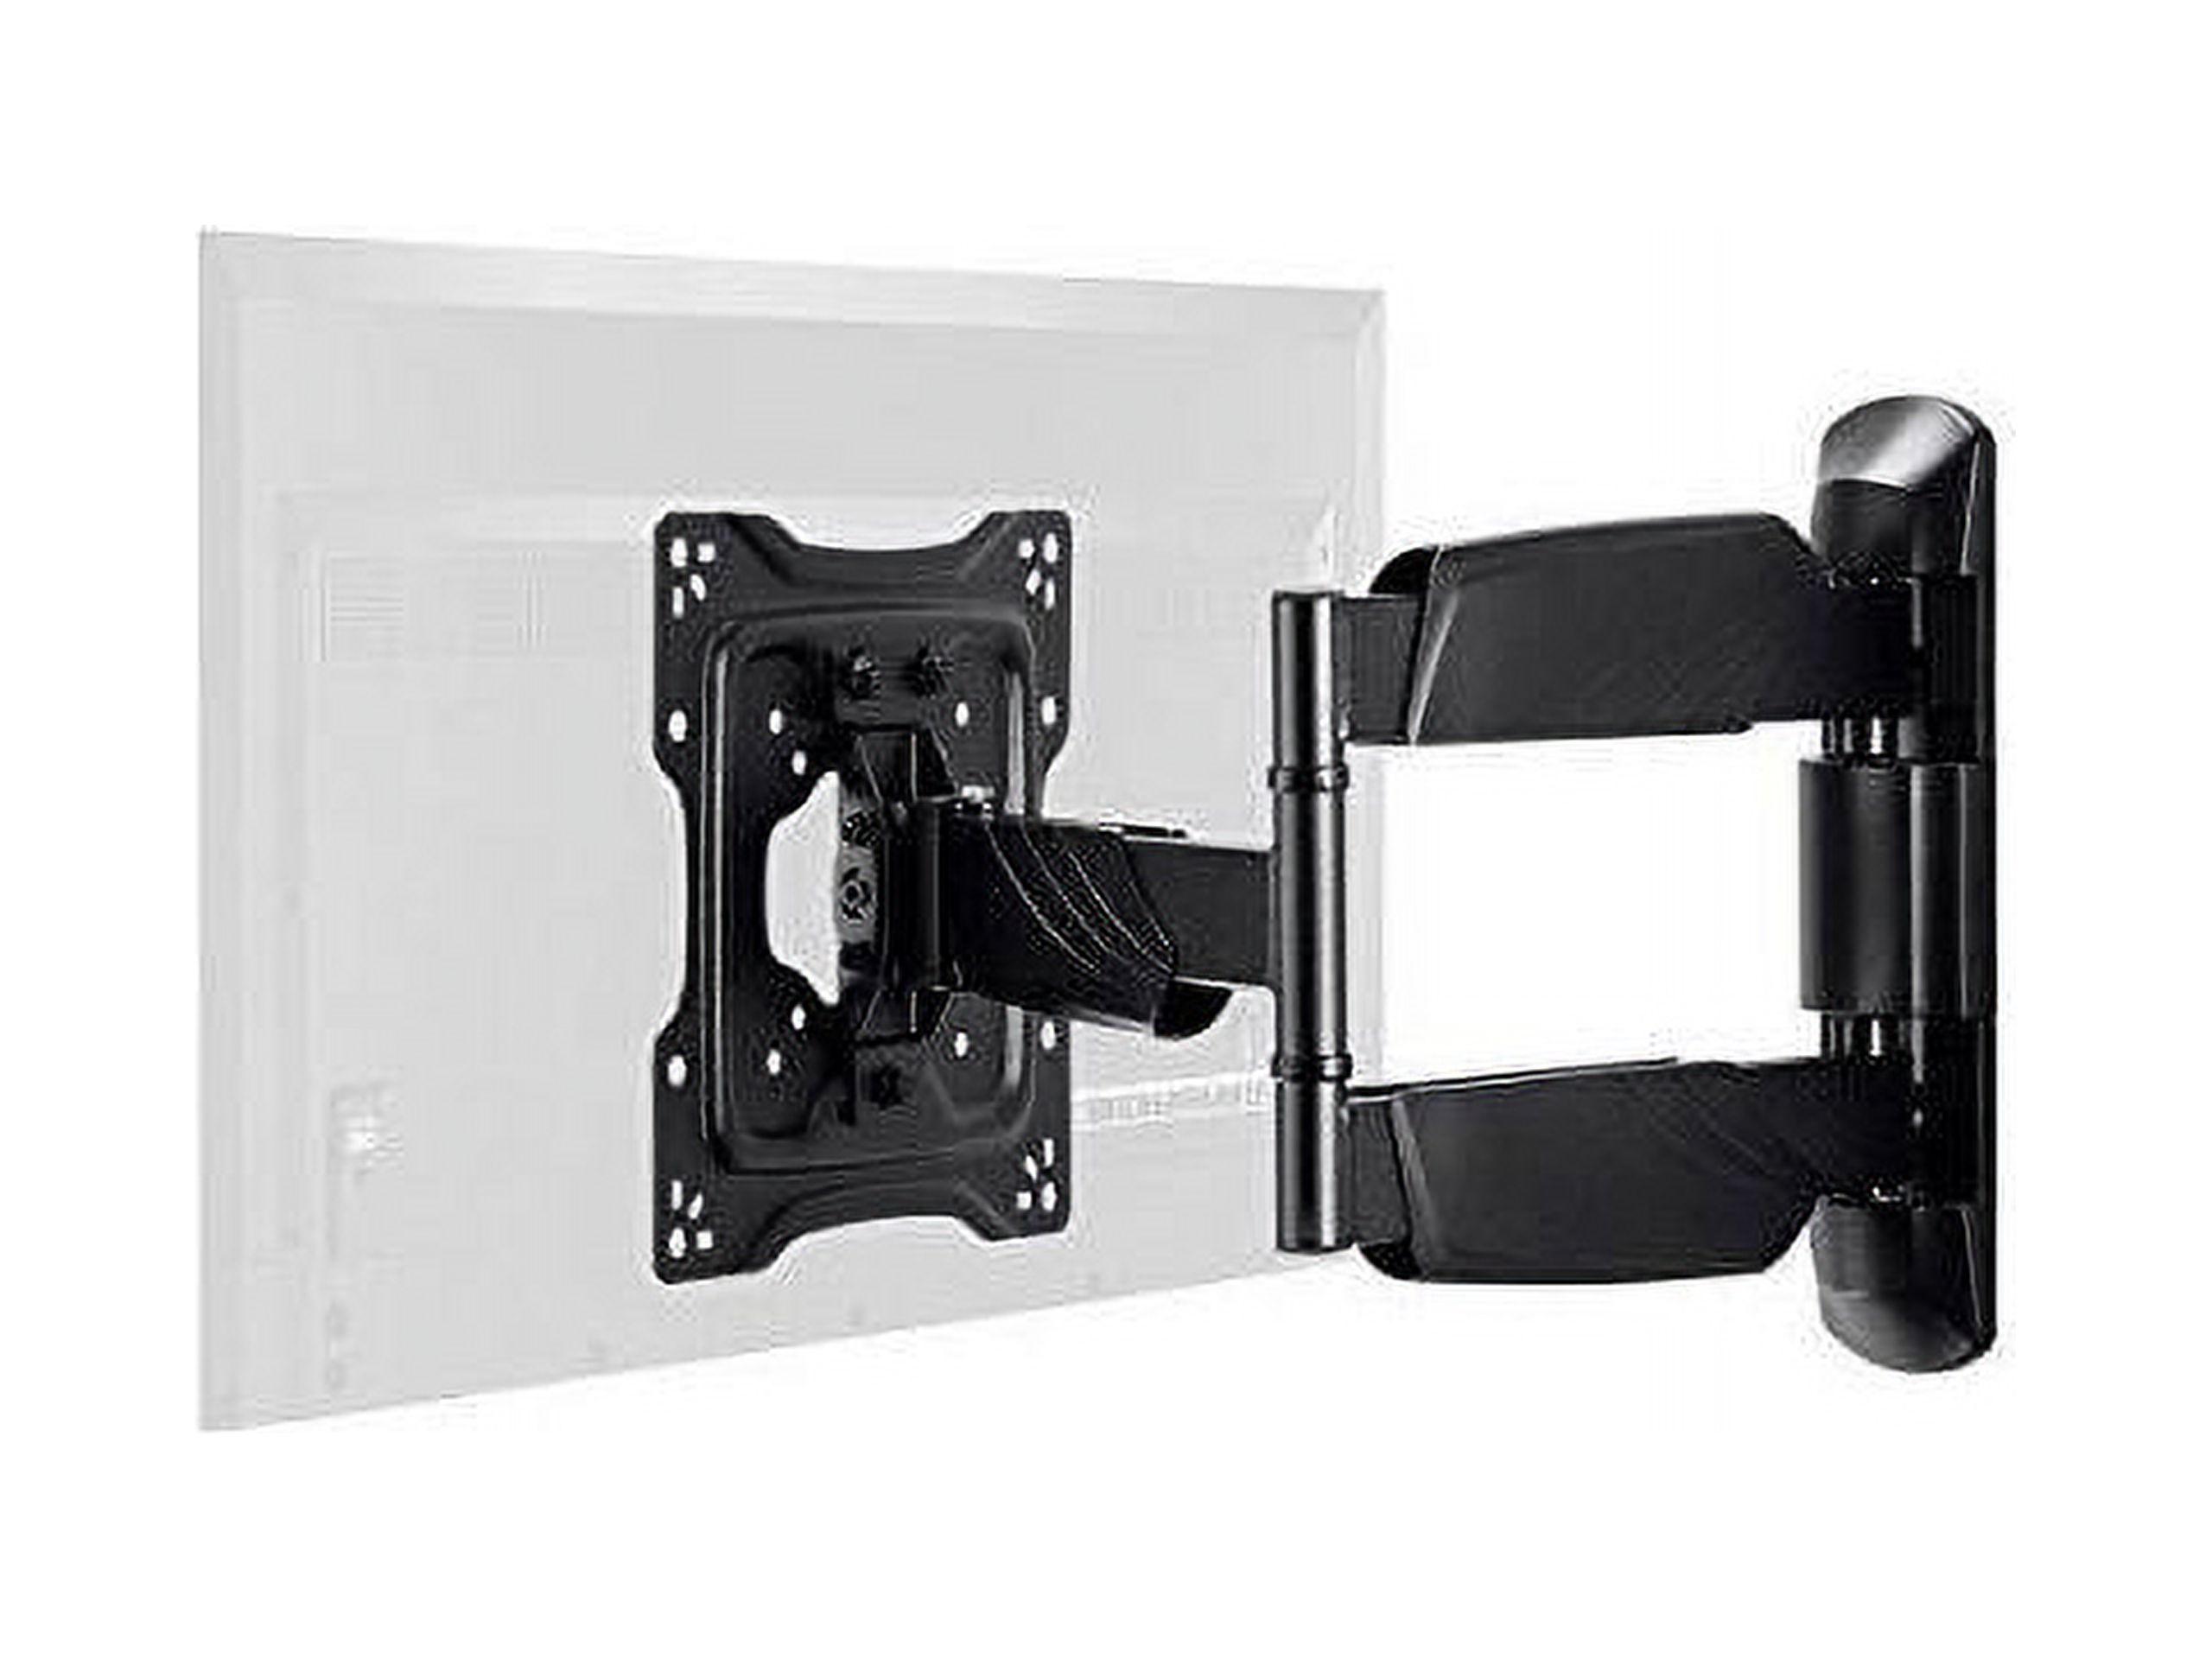 Monoprice Full-Motion Articulating TV Wall Mount Bracket - For LED TVs 24in to 55in, Max Weight 77 Lbs., VESA Patterns Up to 400x400, Rotating, Low Profile, UL Certified - Commercial Series - image 5 of 20